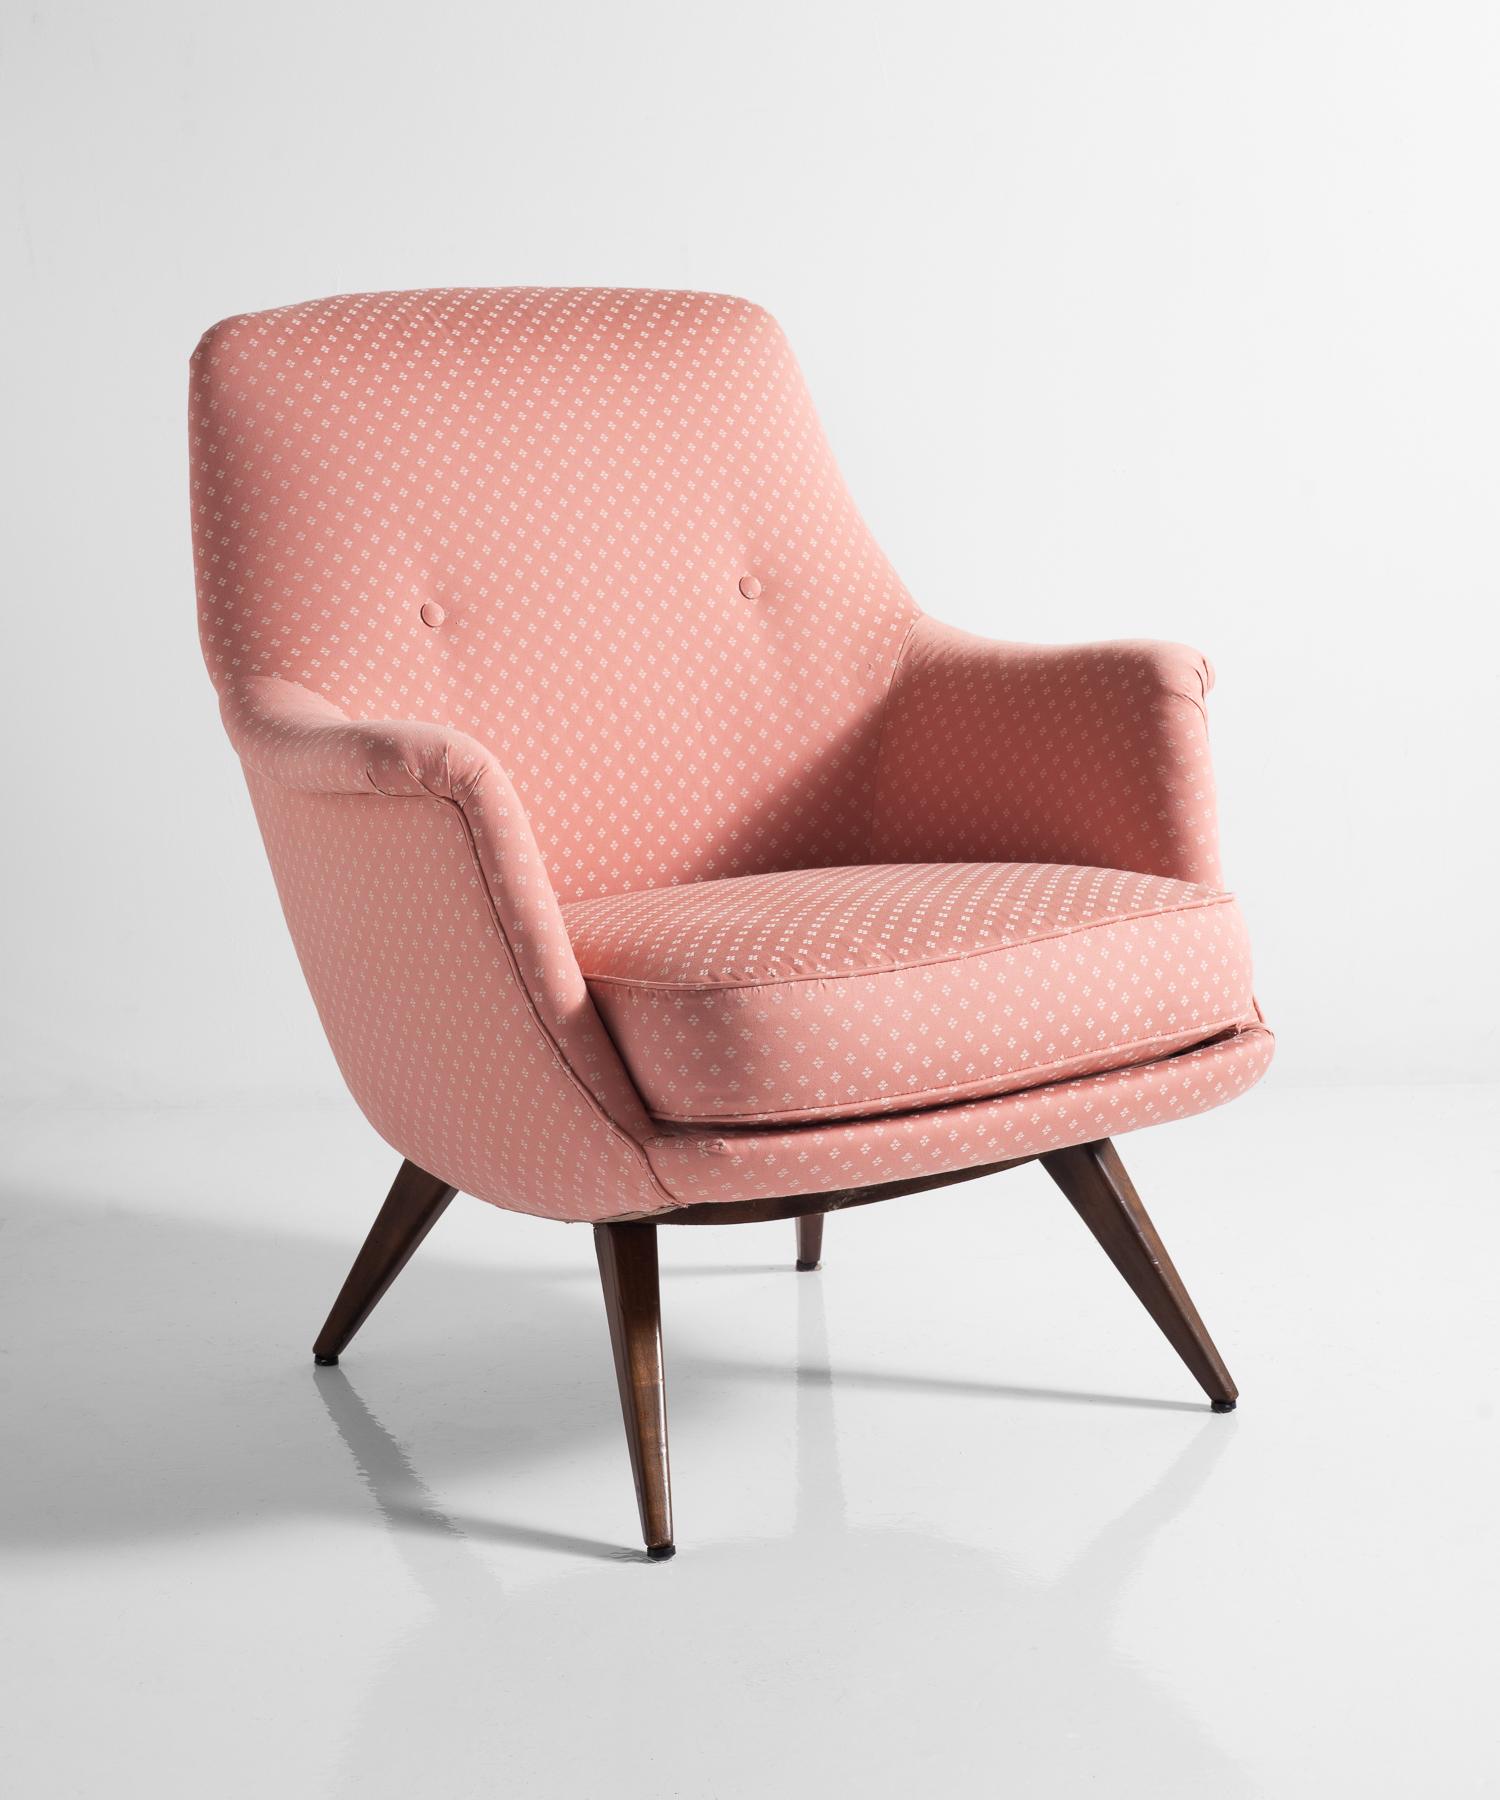 Knoll Armchair by K. Antimott, Germany, circa 1950

Designed by Walter Knoll and newly reupholstered in Blush Cotton Fabric by Titley & Marr.